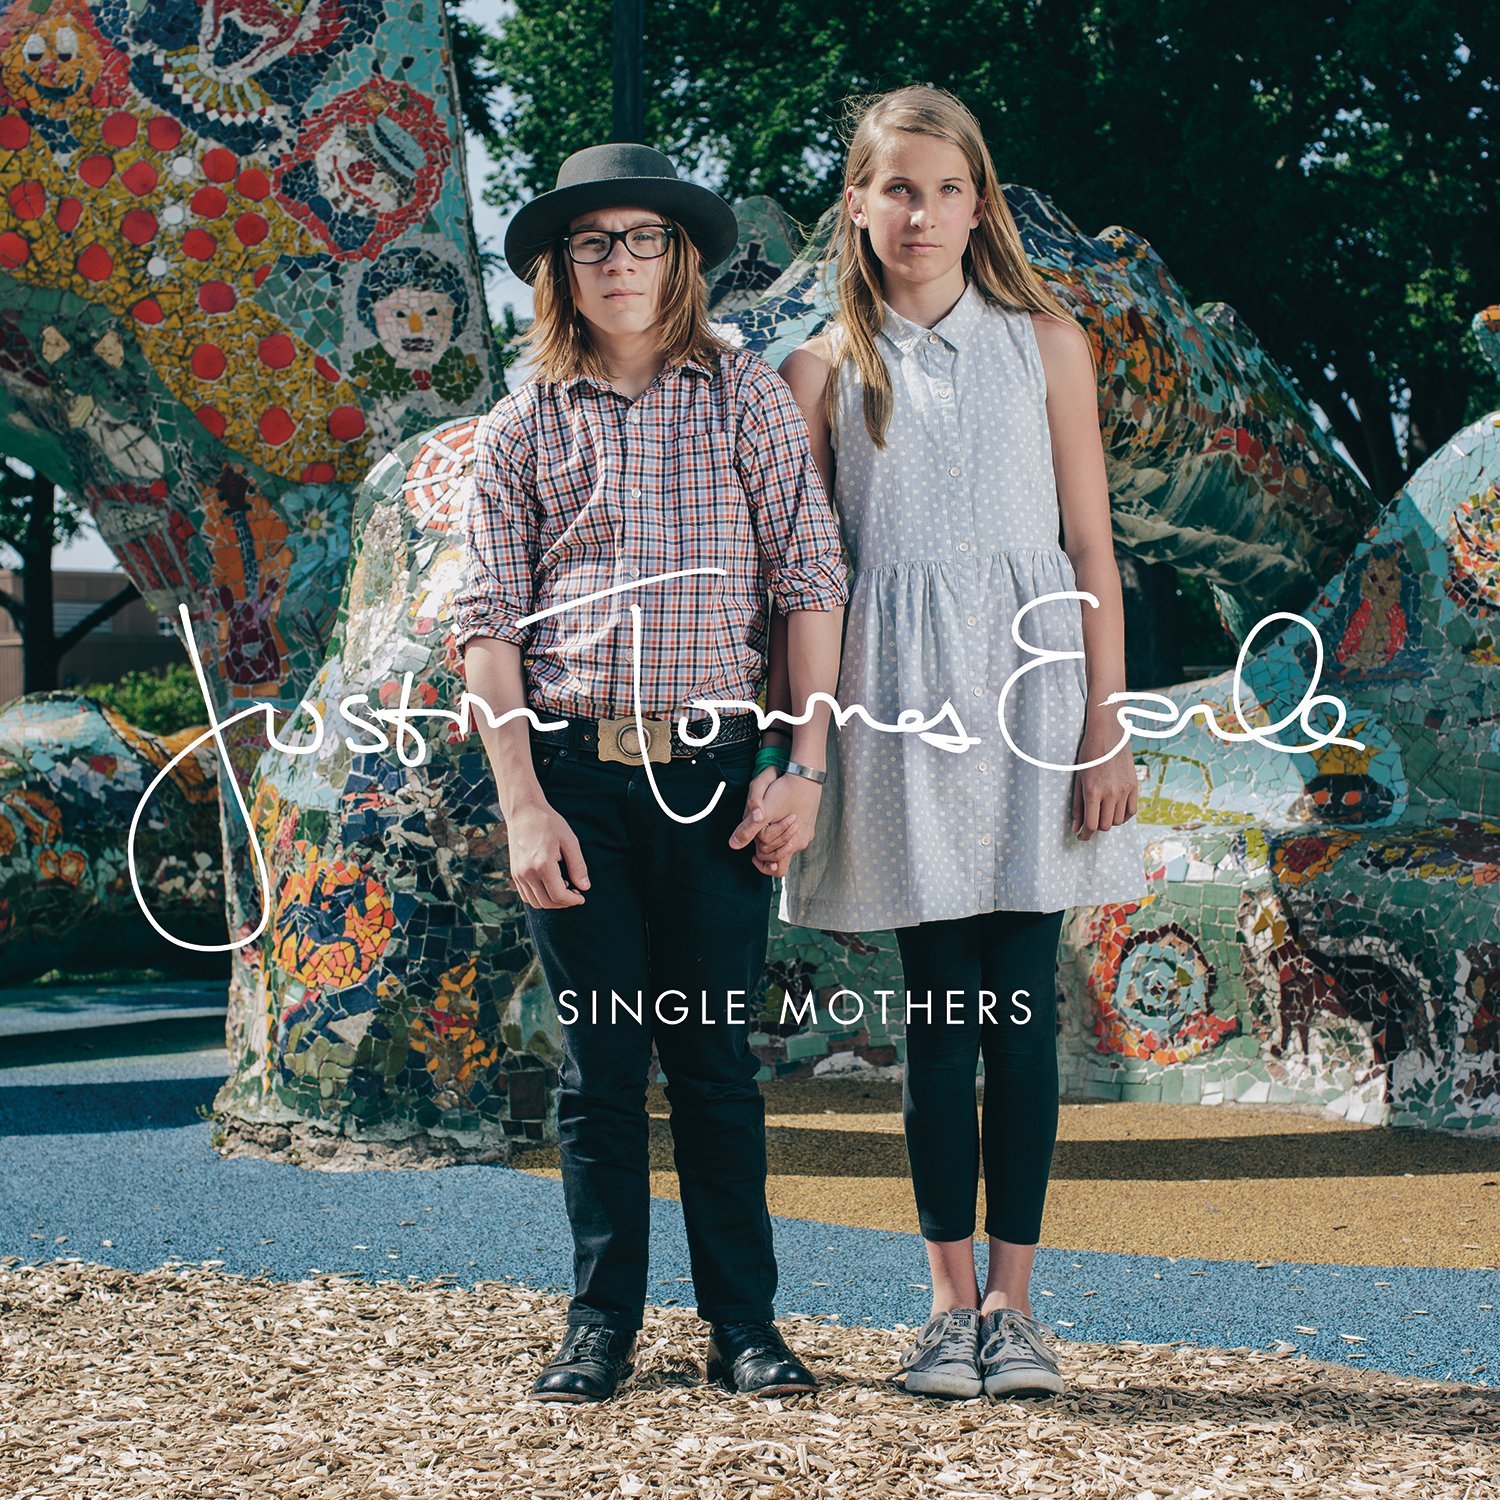 Justin Townes Earle - Single Mothers